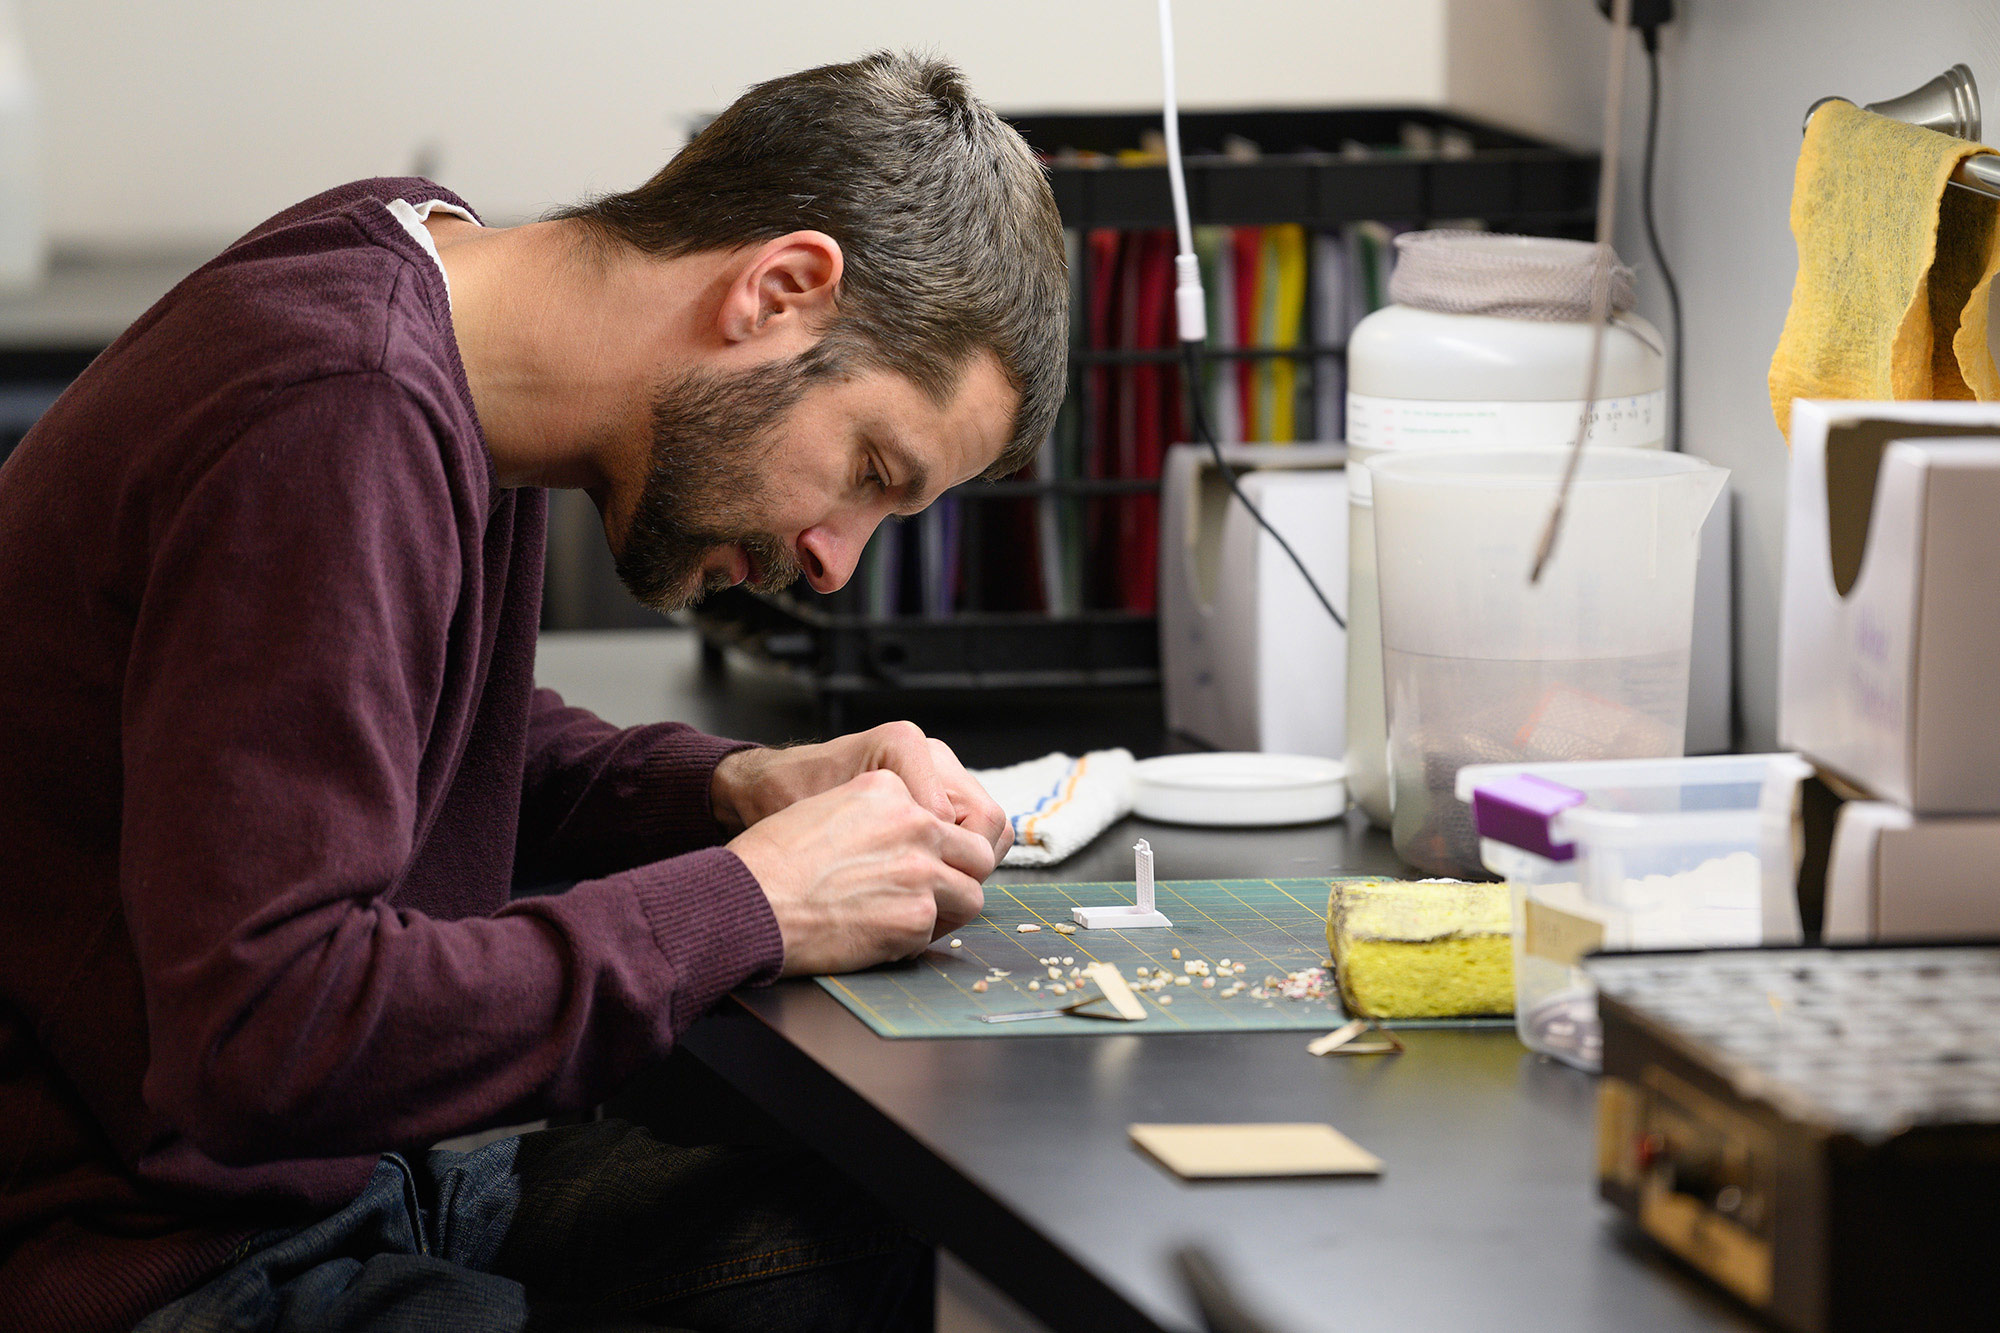 biologist AJ Stephens works with small sections of tooth at a desk